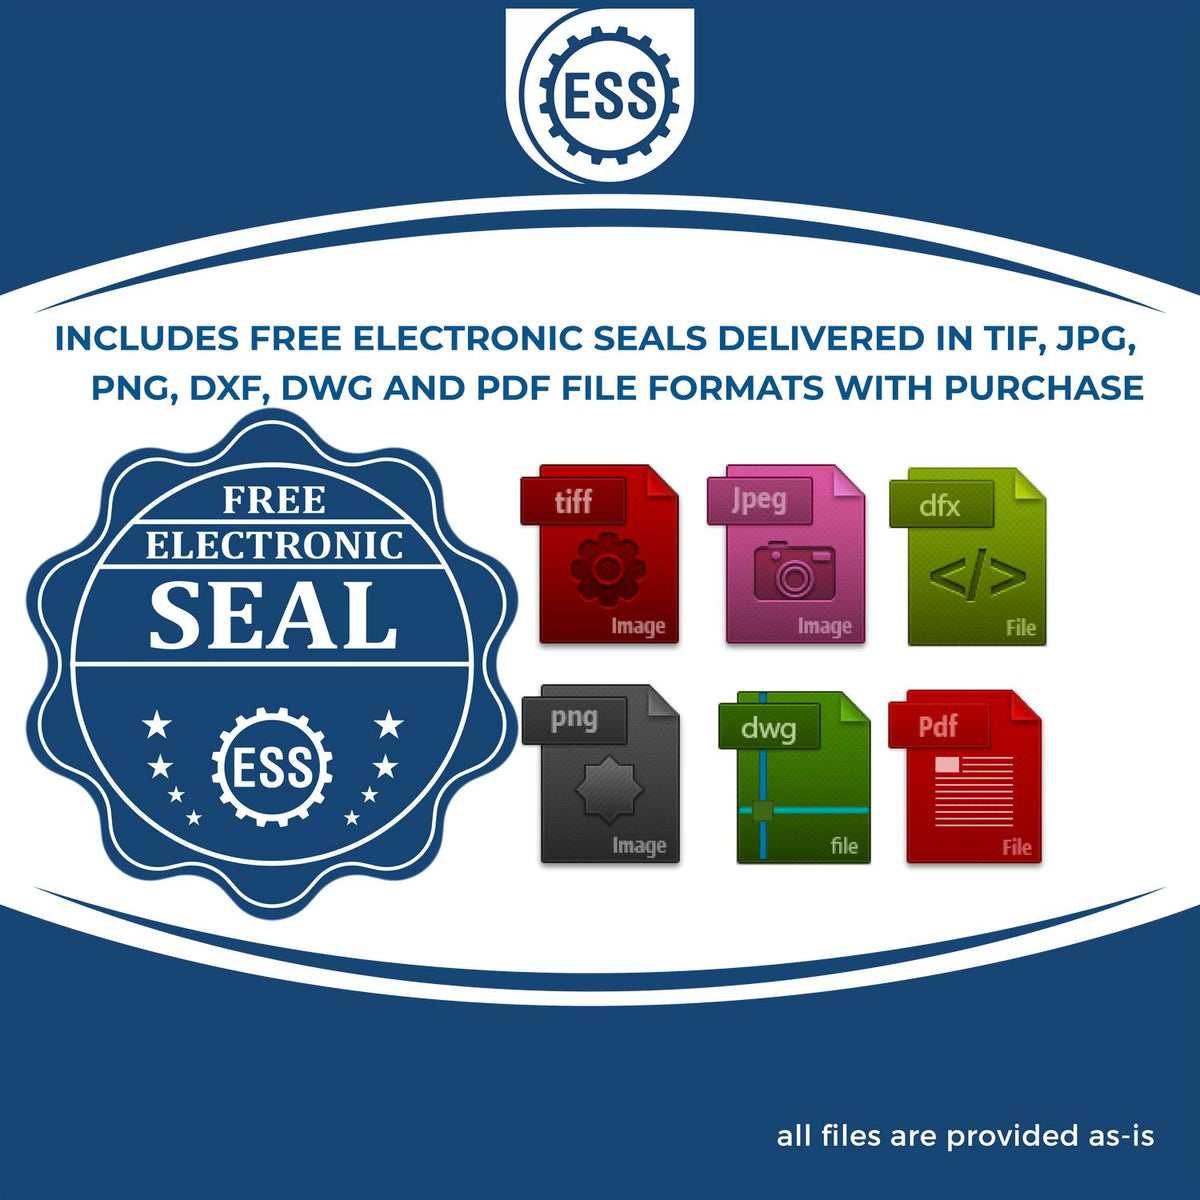 An infographic for the free electronic seal for the Slim Pre-Inked Alaska Professional Engineer Seal Stamp illustrating the different file type icons such as DXF, DWG, TIF, JPG and PNG.